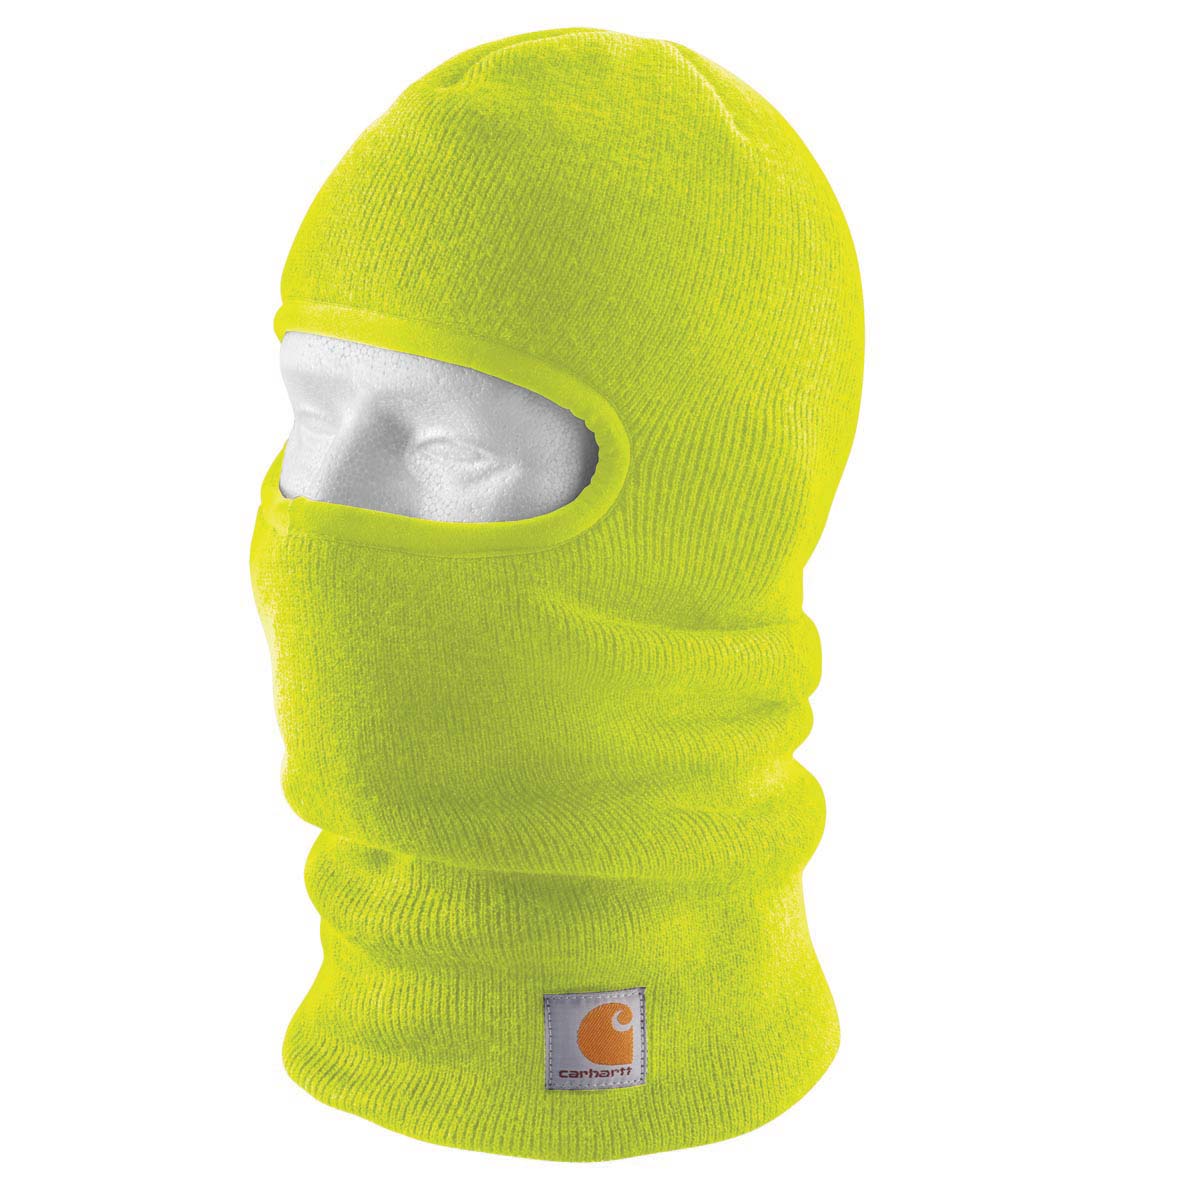 Carhartt Men's Knit Insulated Face Mask - Discontinued Pricing